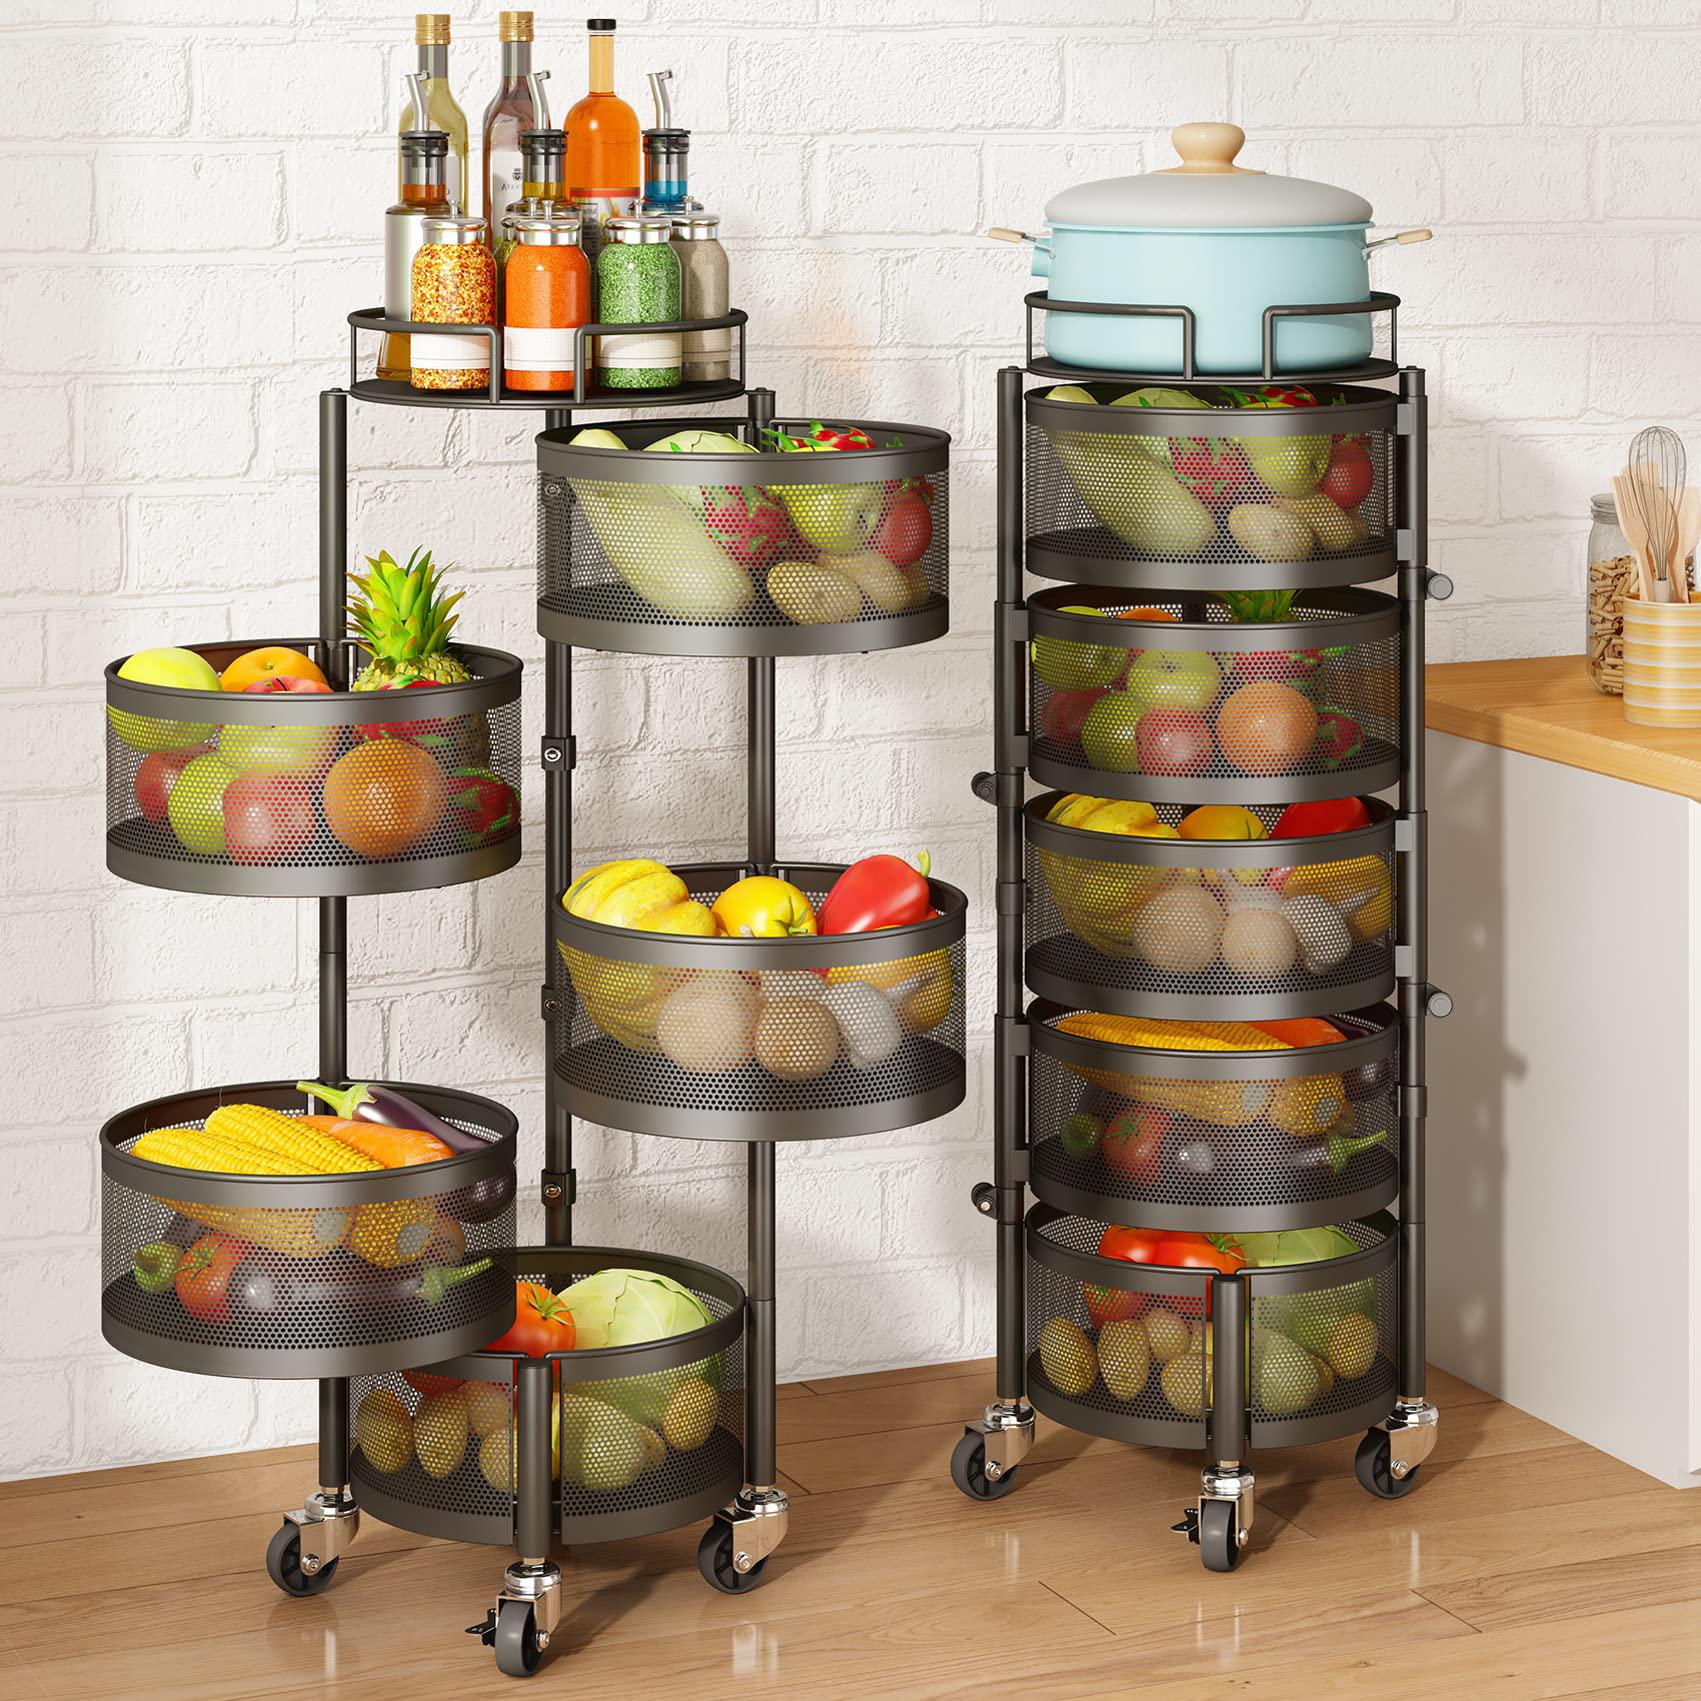 sntd fruit and vegetable basket bowls for kitchen with metal top lid, sntd 5 tier rotating storage rack cart for potato onion brea